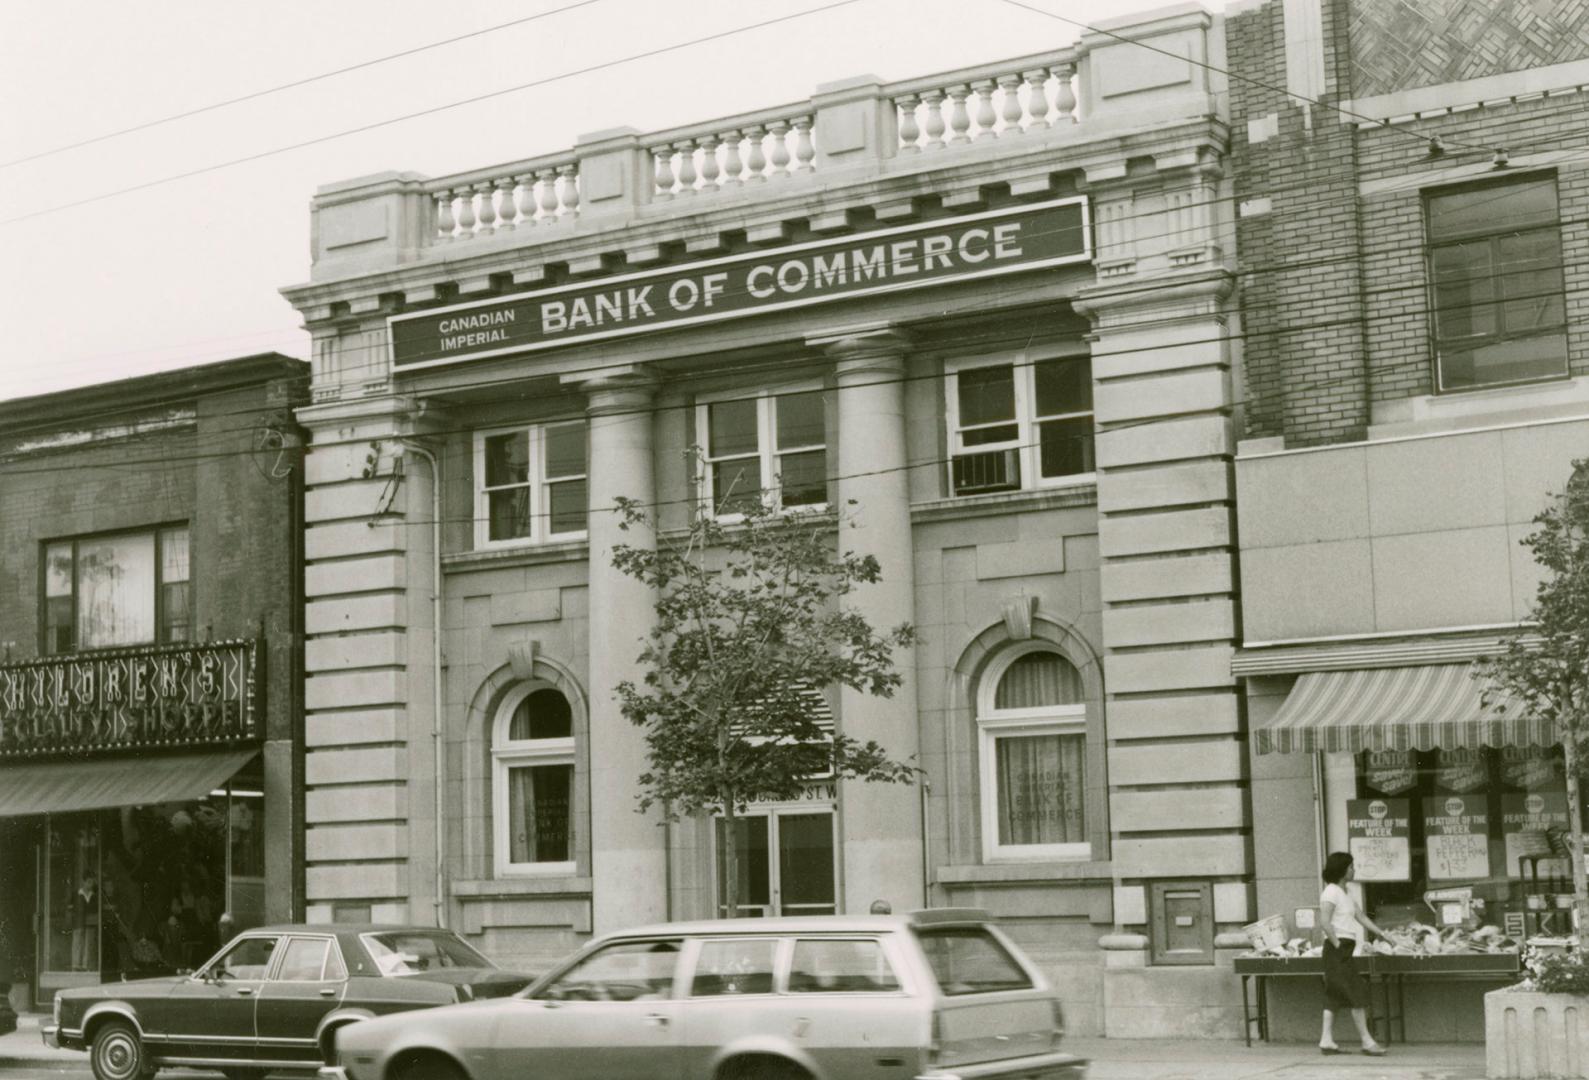 Canadian Imperial Bank of Commerce branch, originally Canadian Bank of Commerce branch, Dundas Street West, north side, between Keele Street and Pacific Avenue, Toronto, Ontario.